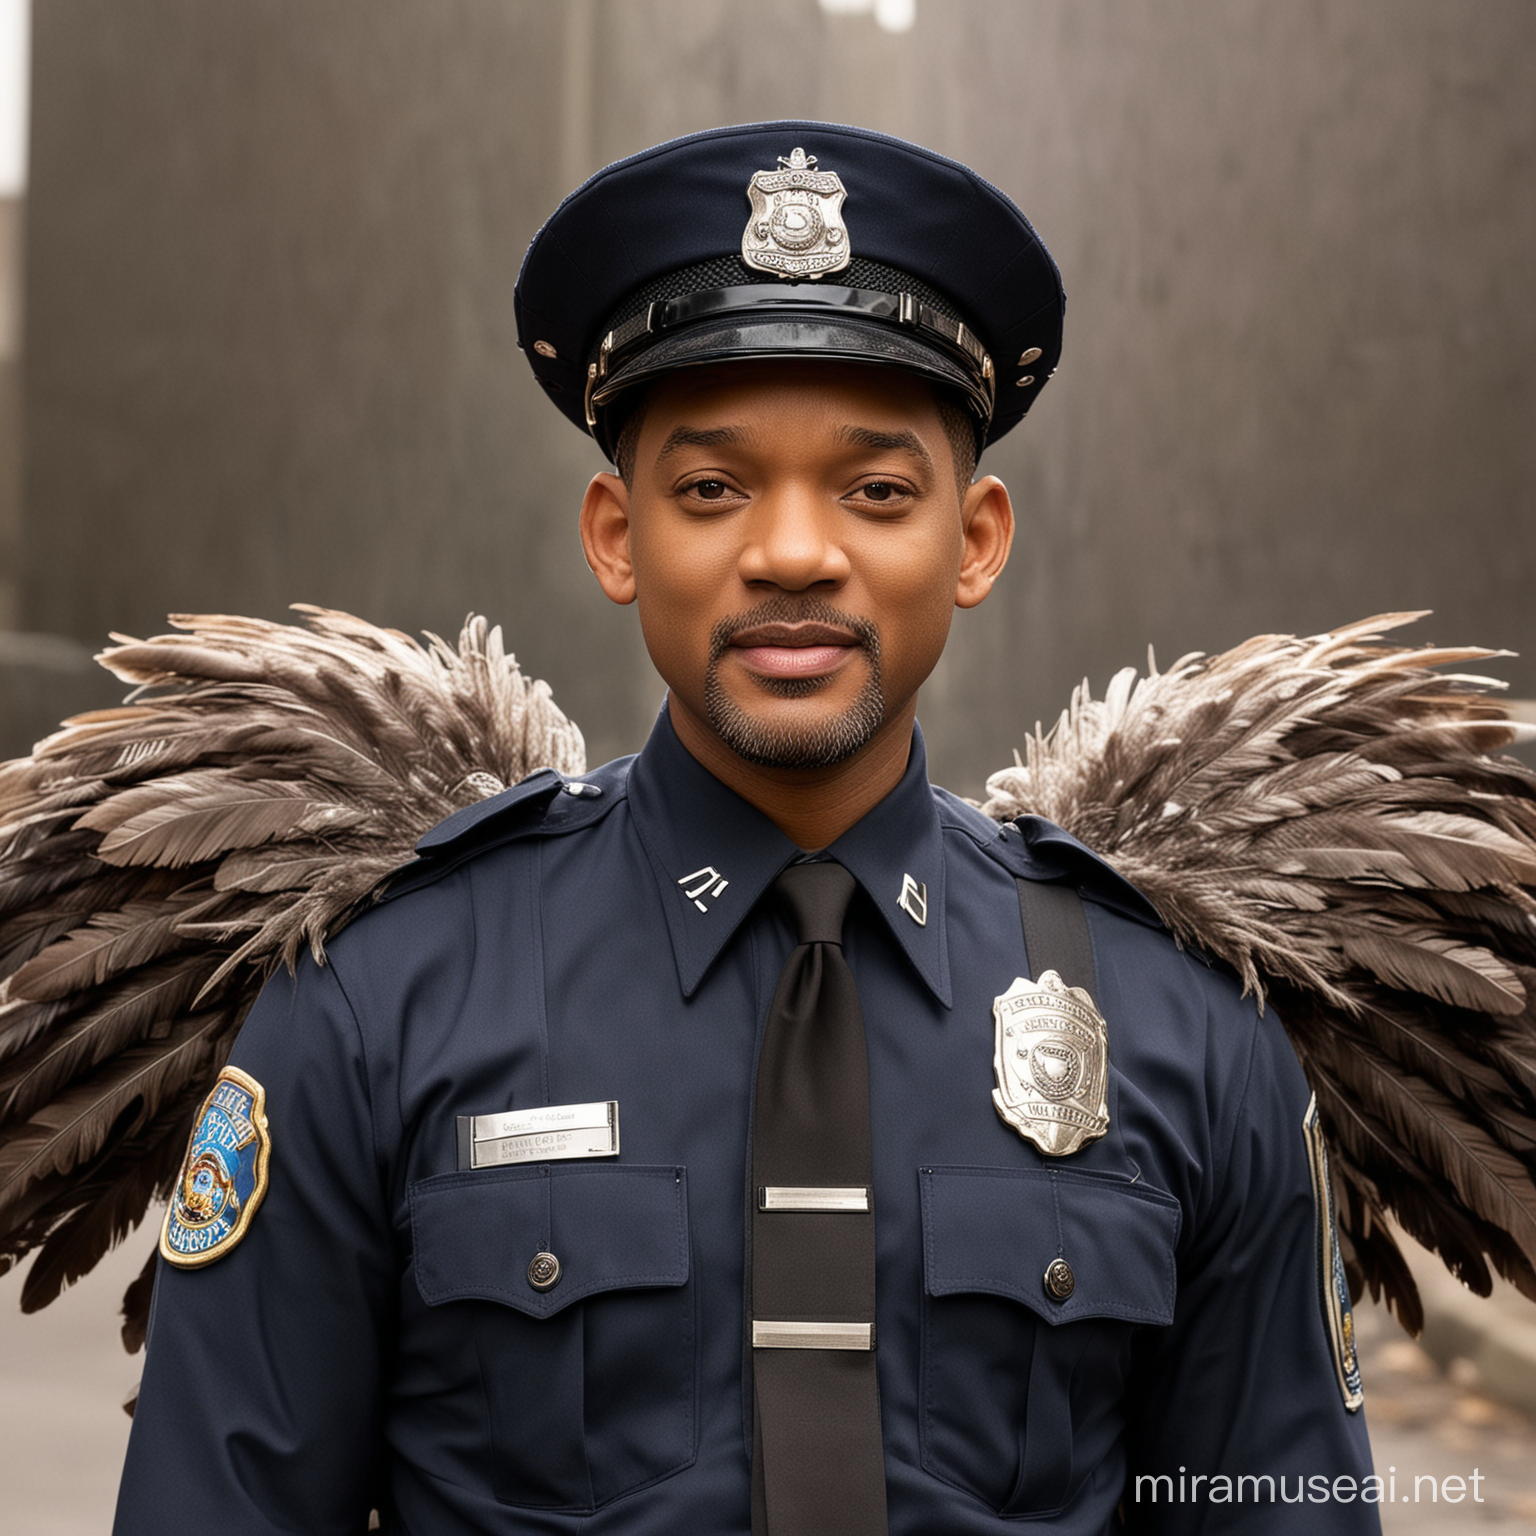 Actor Will Smith in Police Officer Costume with Ornate Feathers